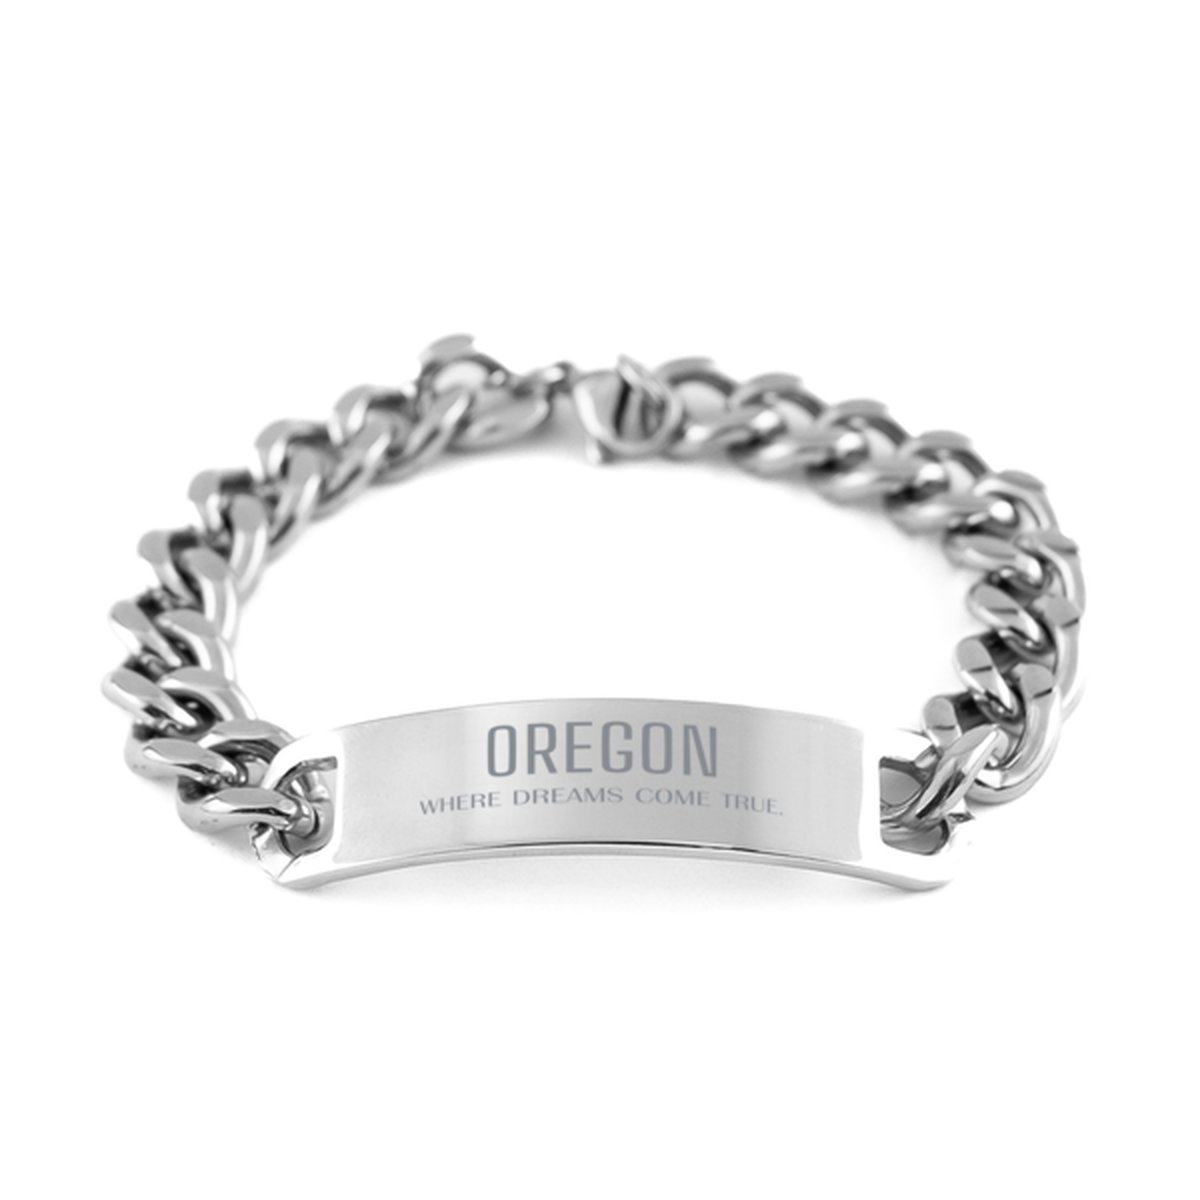 Love Oregon State Cuban Chain Stainless Steel Bracelet, Oregon Where dreams come true, Birthday Inspirational Gifts For Oregon Men, Women, Friends